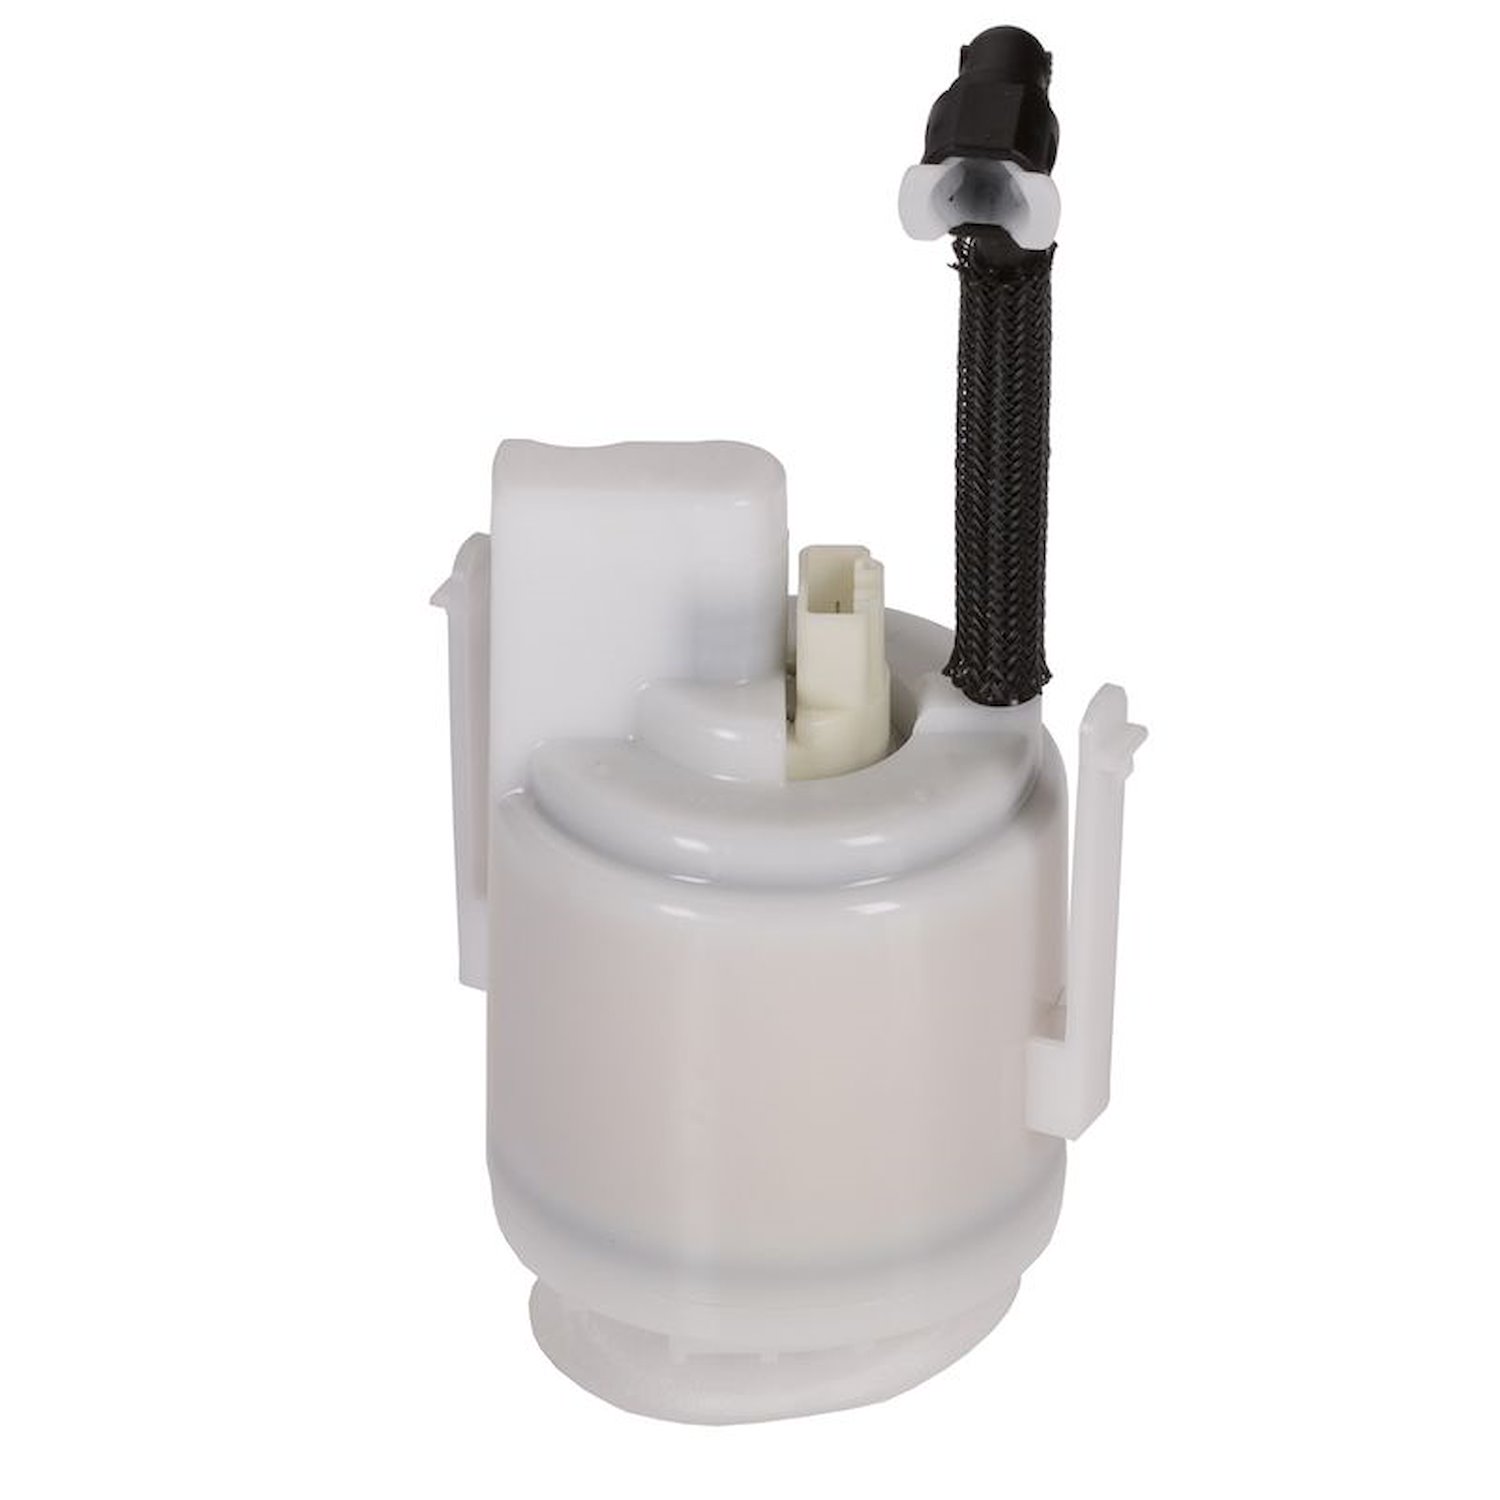 OE Replacement Fuel Pump Module Assembly for 2000-2002 Nissan Sentra